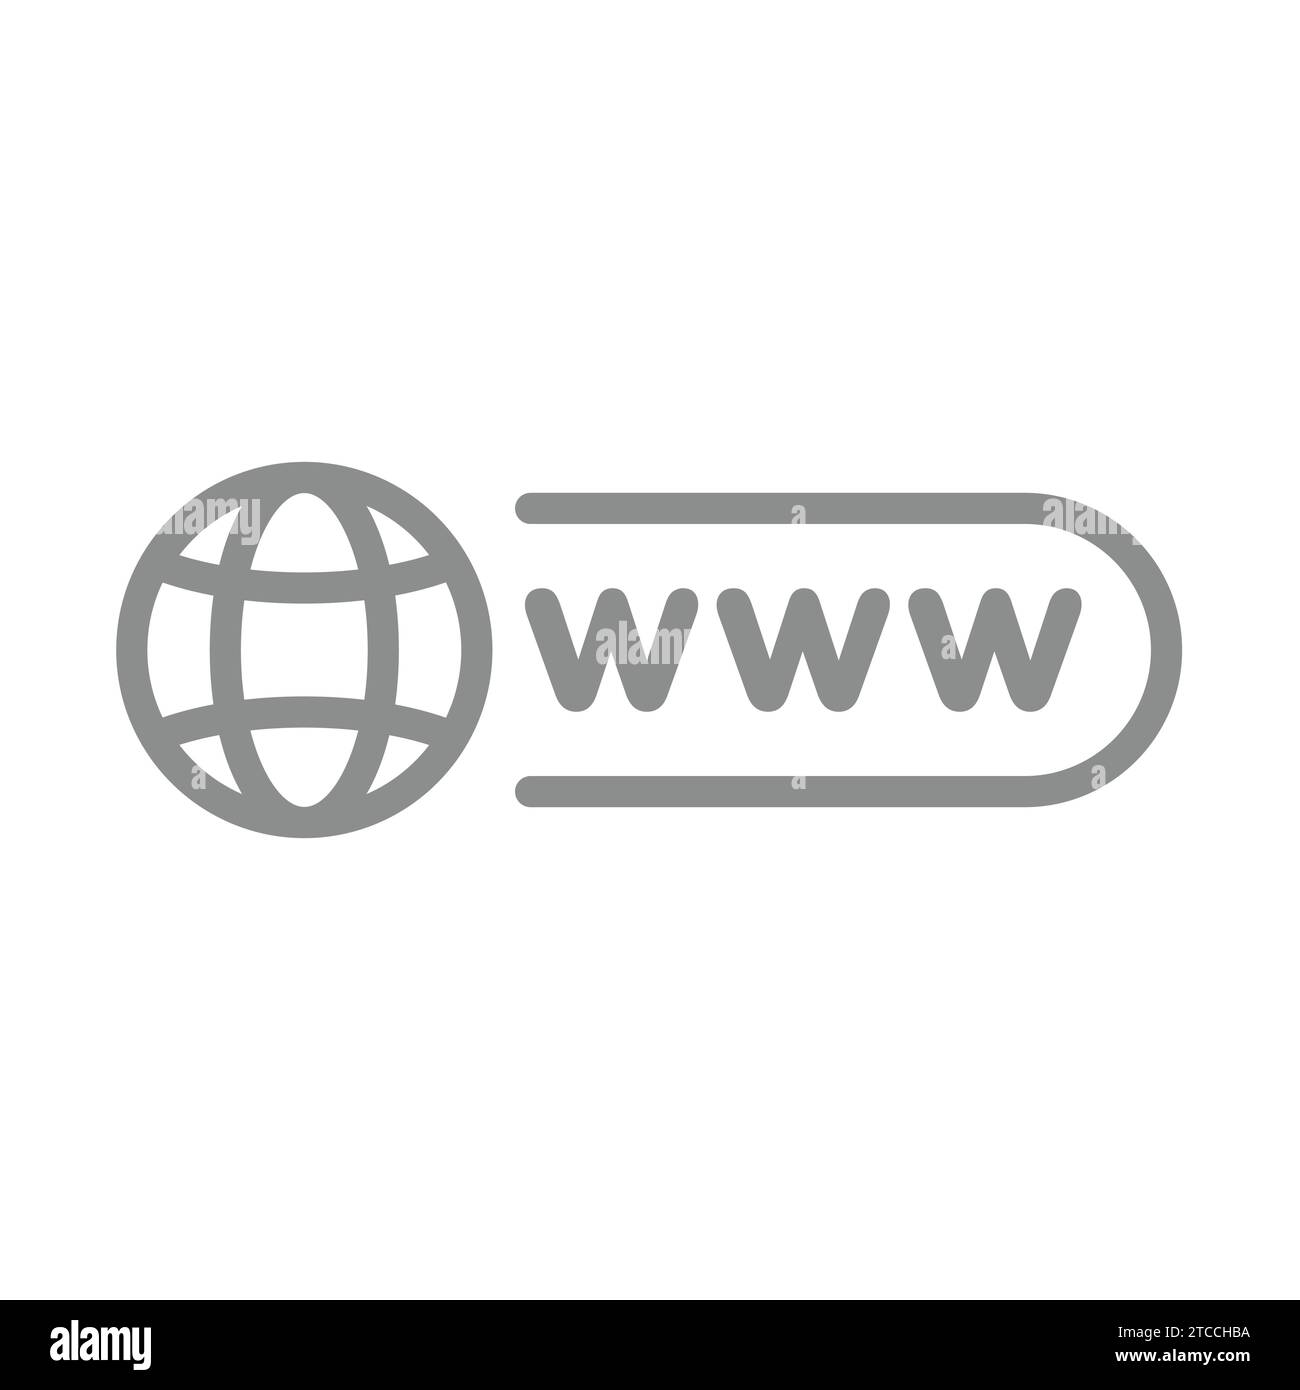 Www address bar vector icon. Web page line symbol. Stock Vector